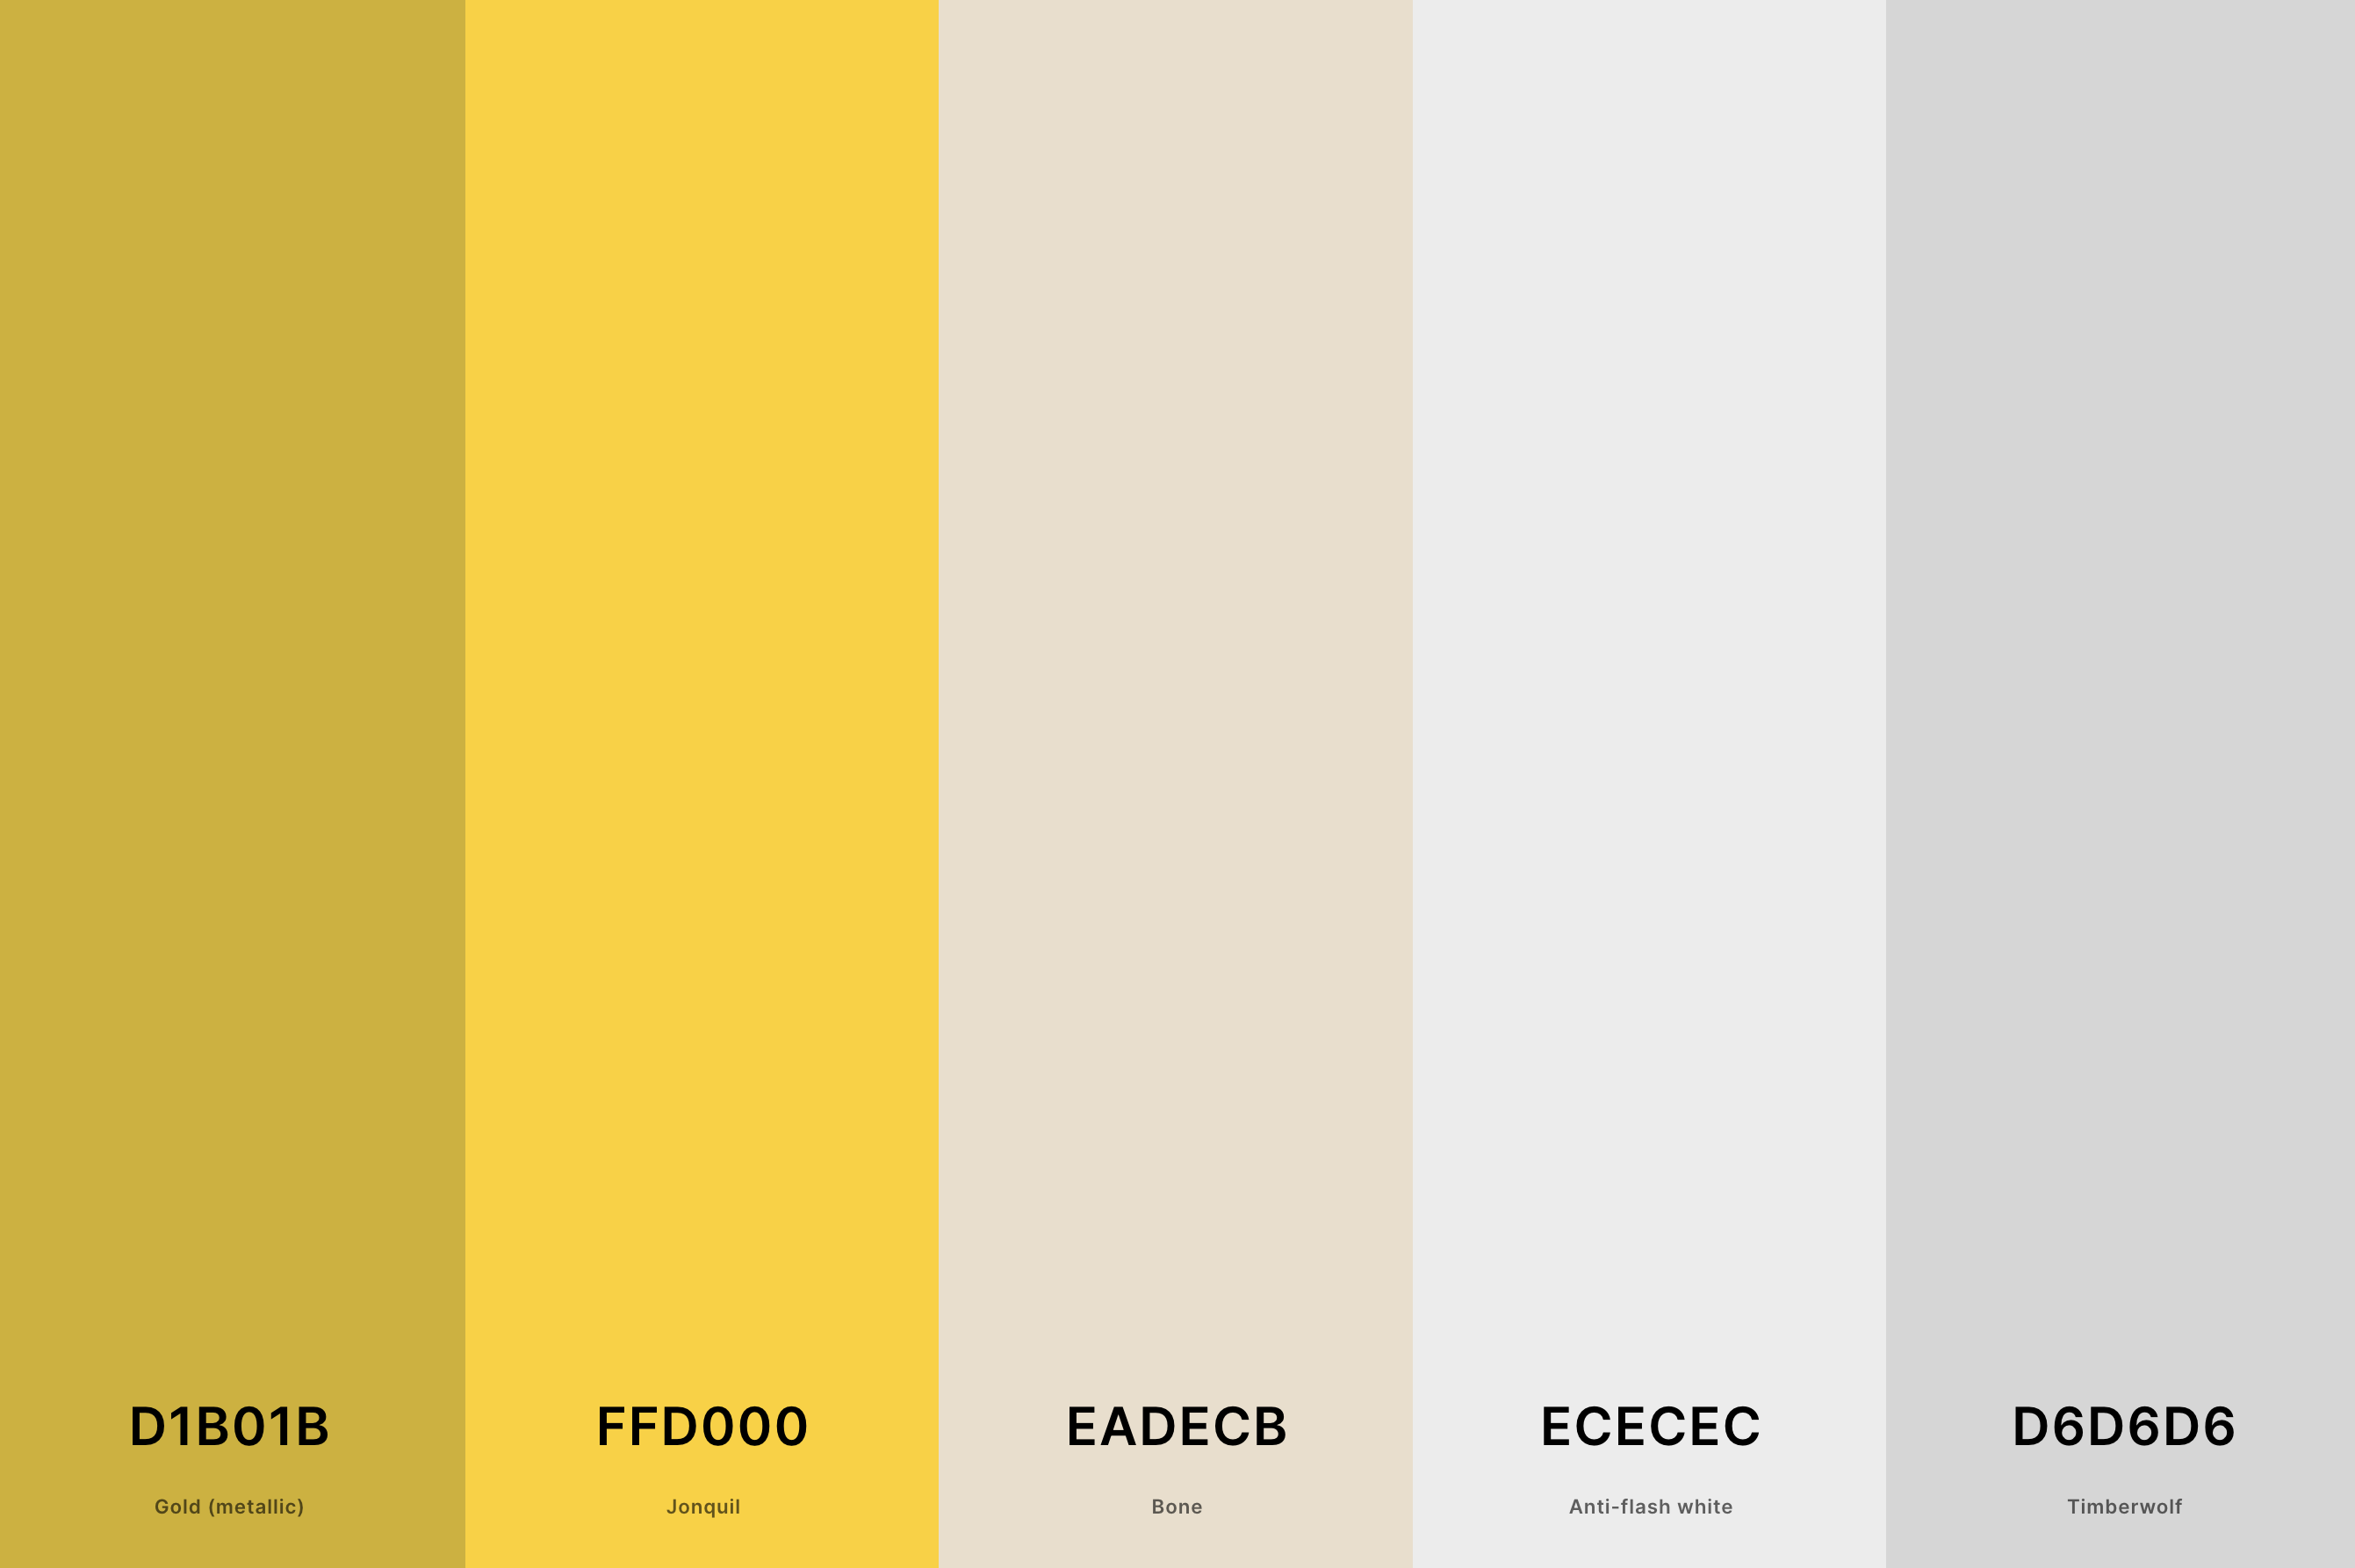 23. White And Gold Color Palette Color Palette with Gold (Metallic) (Hex #D1B01B) + Jonquil (Hex #FFD000) + Bone (Hex #EADECB) + Anti-Flash White (Hex #ECECEC) + Timberwolf (Hex #D6D6D6) Color Palette with Hex Codes